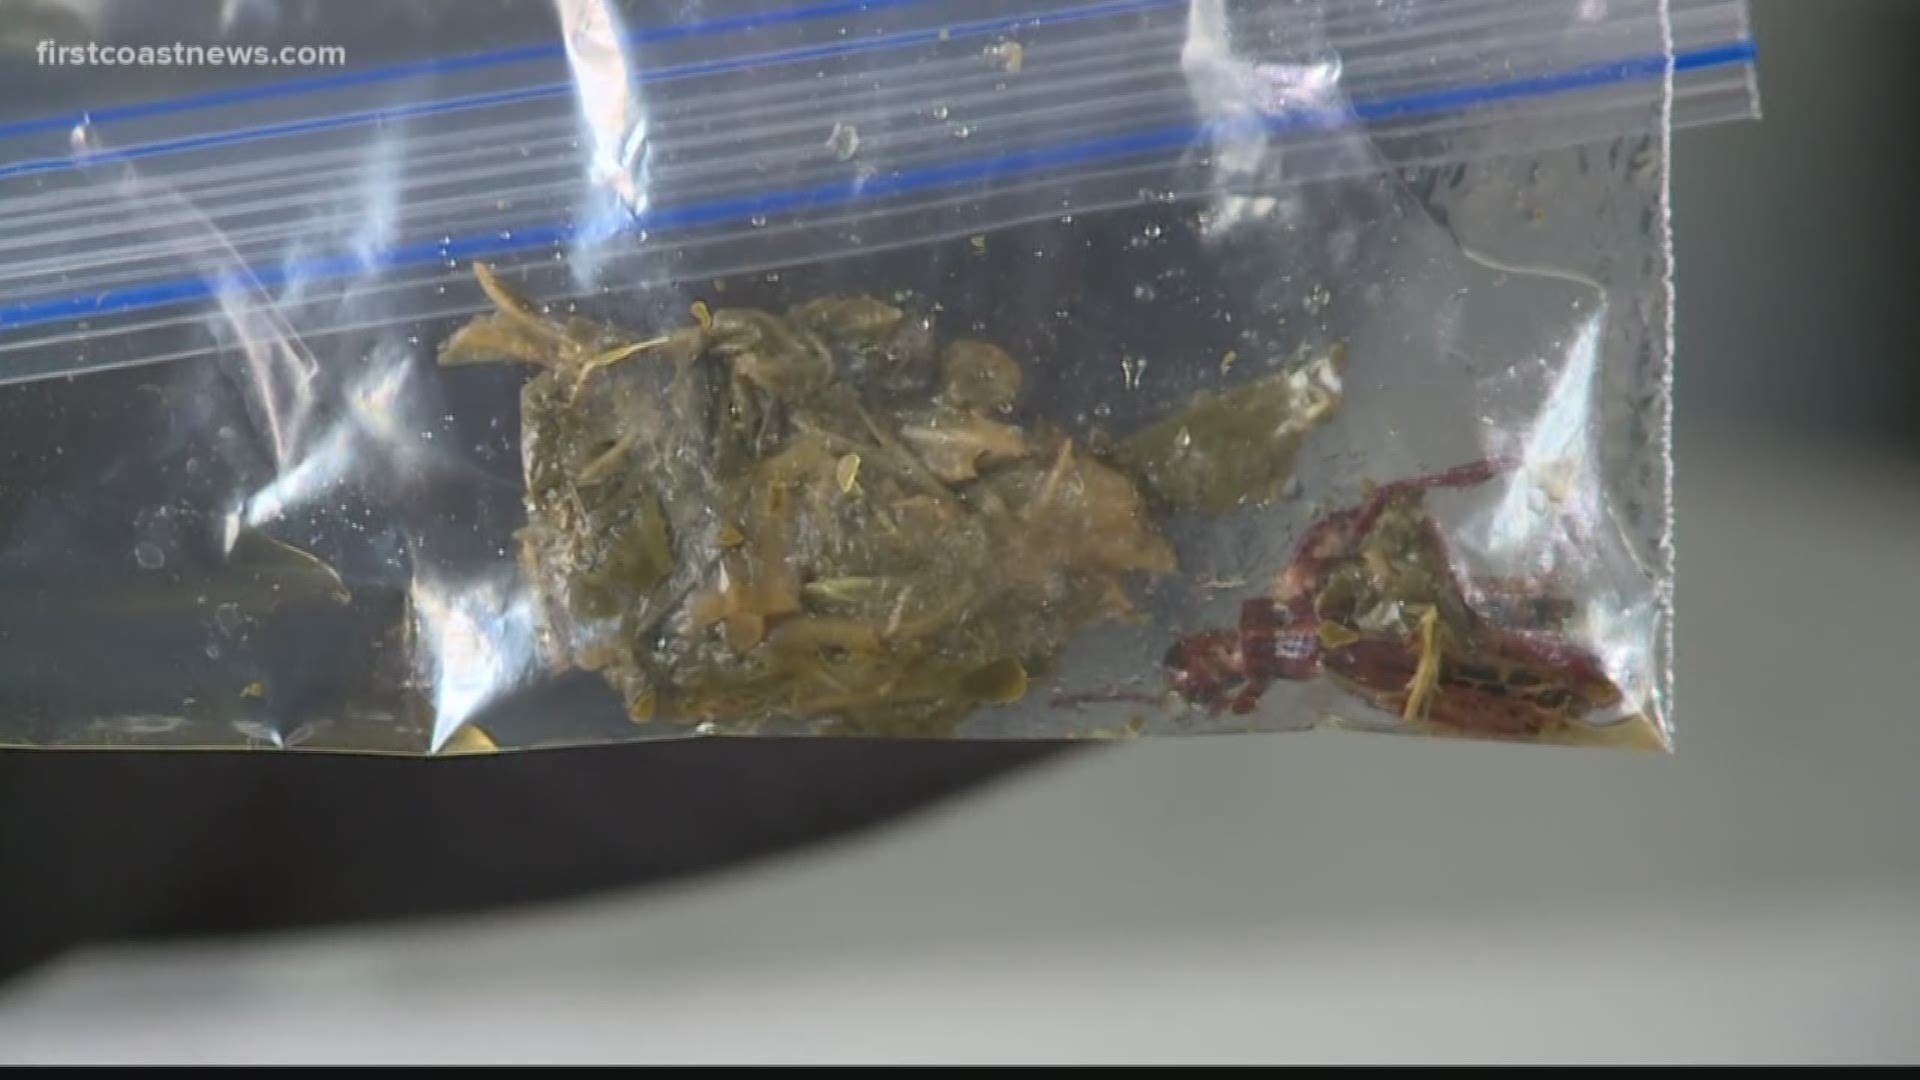 A woman told First Coast News she found a roach in the food she ordered from Bono's Pit Bar-B-Q in Jacksonville.